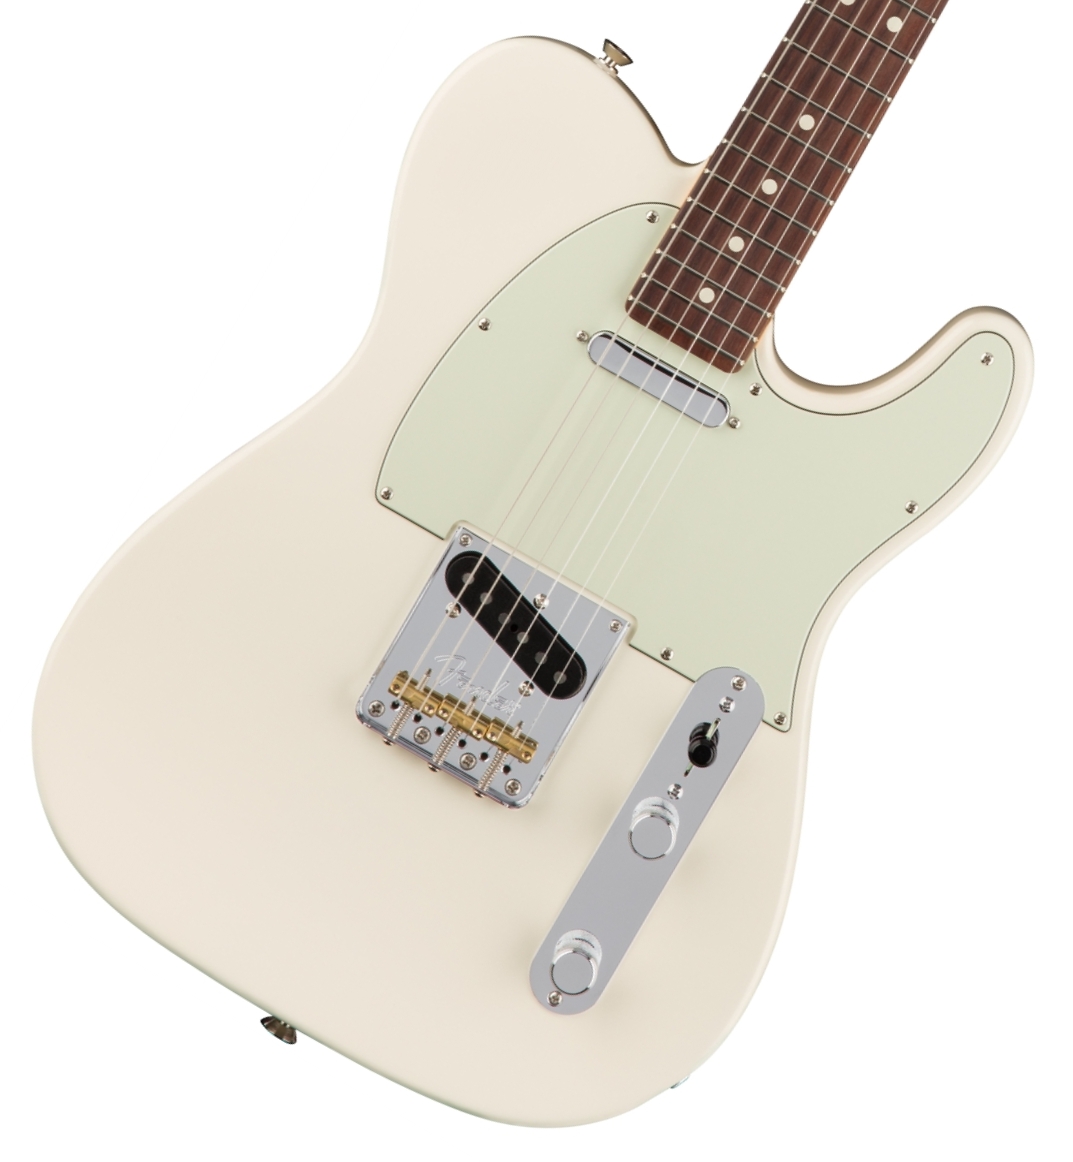 American　Rosewood　フェンダー　White　Fender　Telecaster　Olympic　USA　Professional　イシバシ楽器